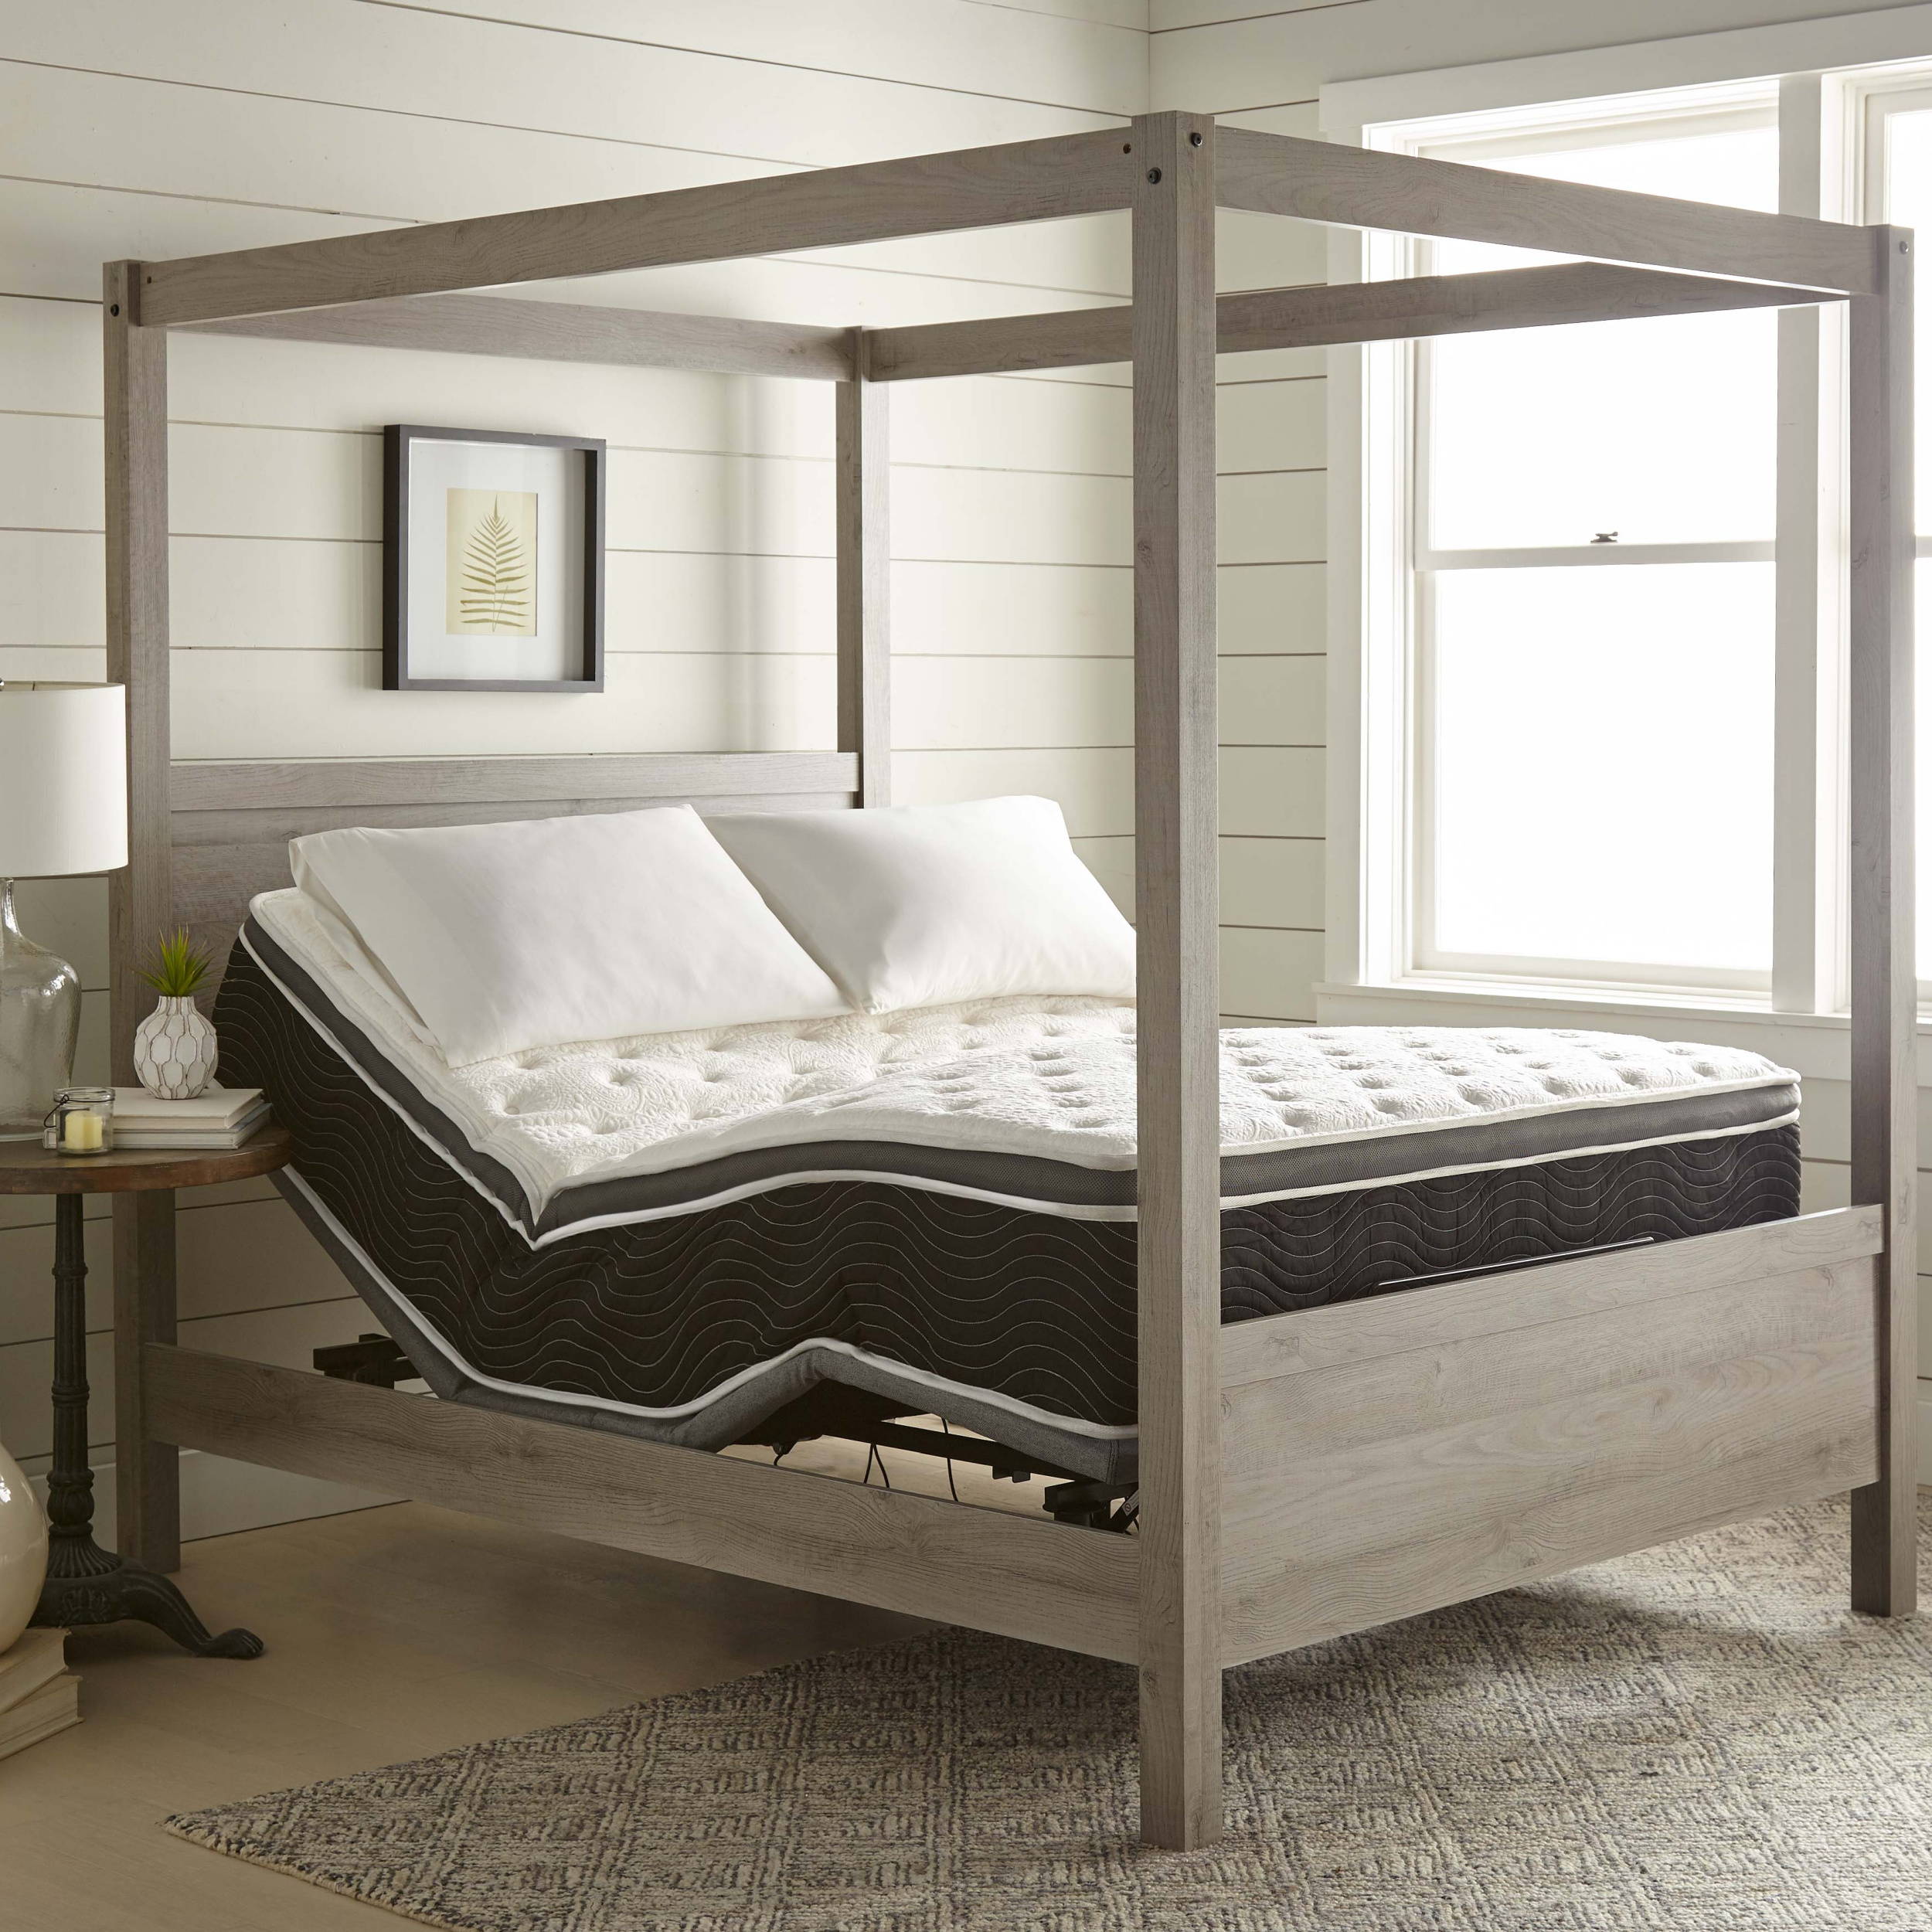 CoreLift motion base easily fits inside a bed frame.